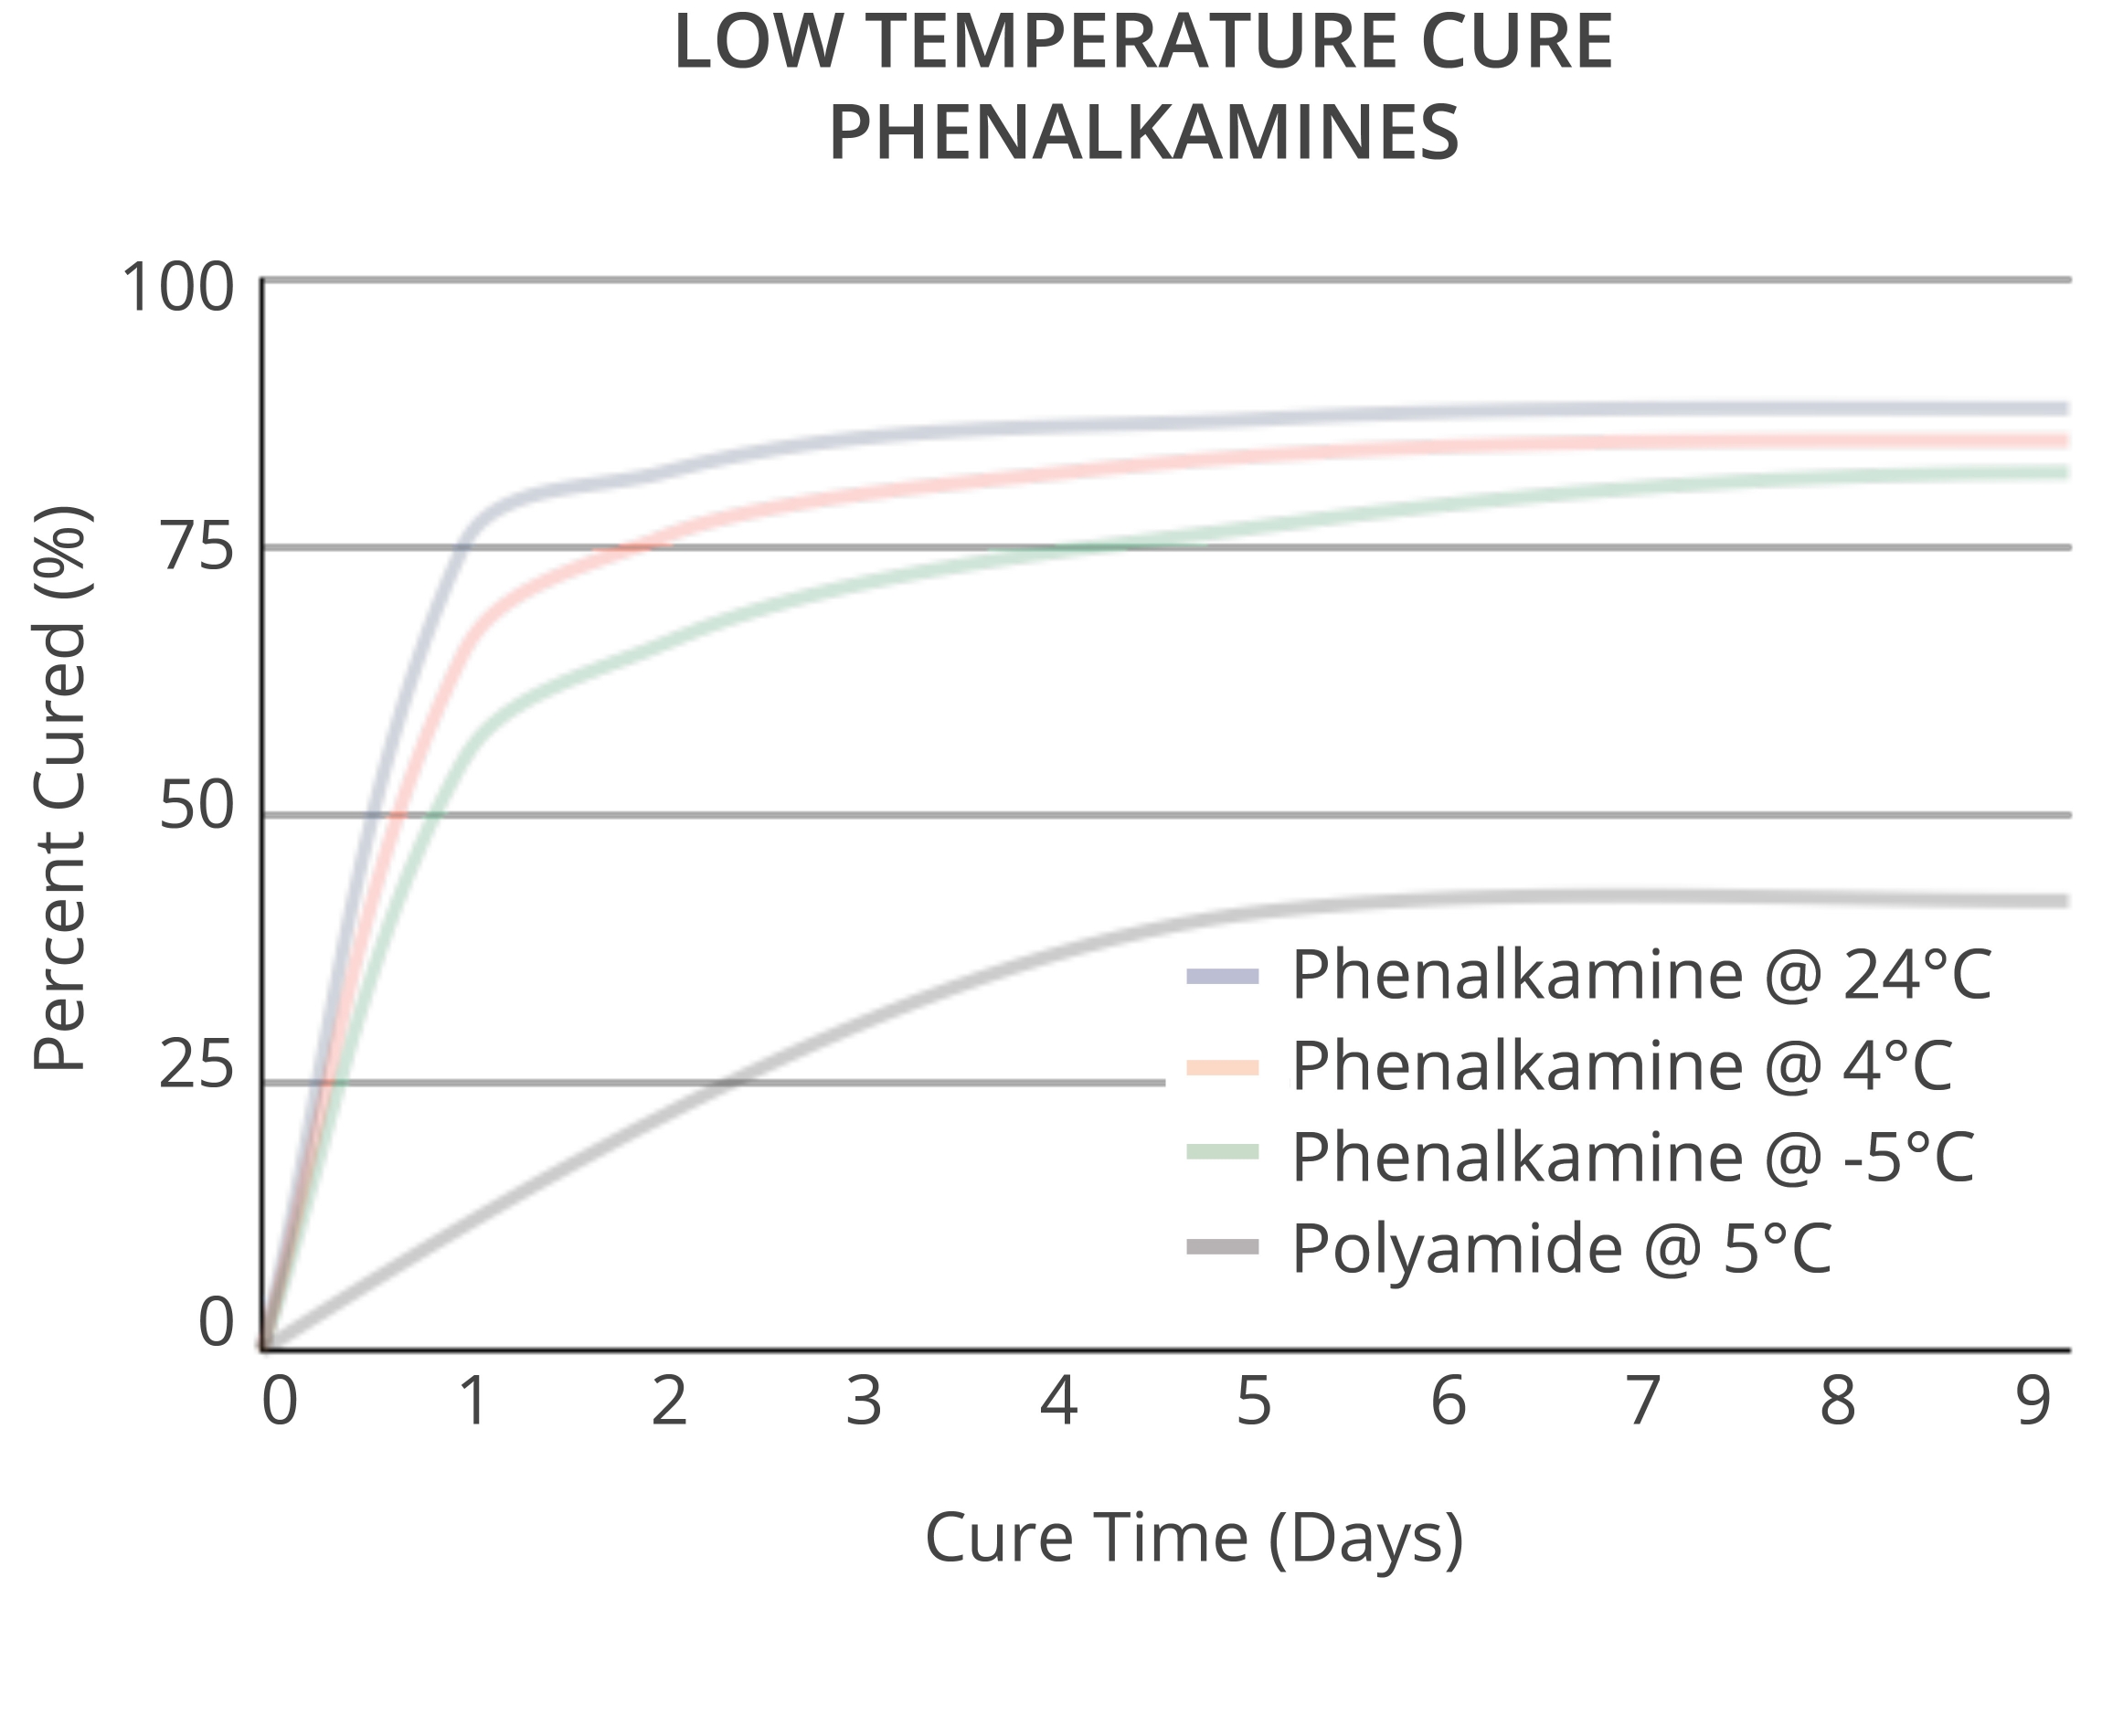 Cardolite phenalkamines cure very fast are low temperatures